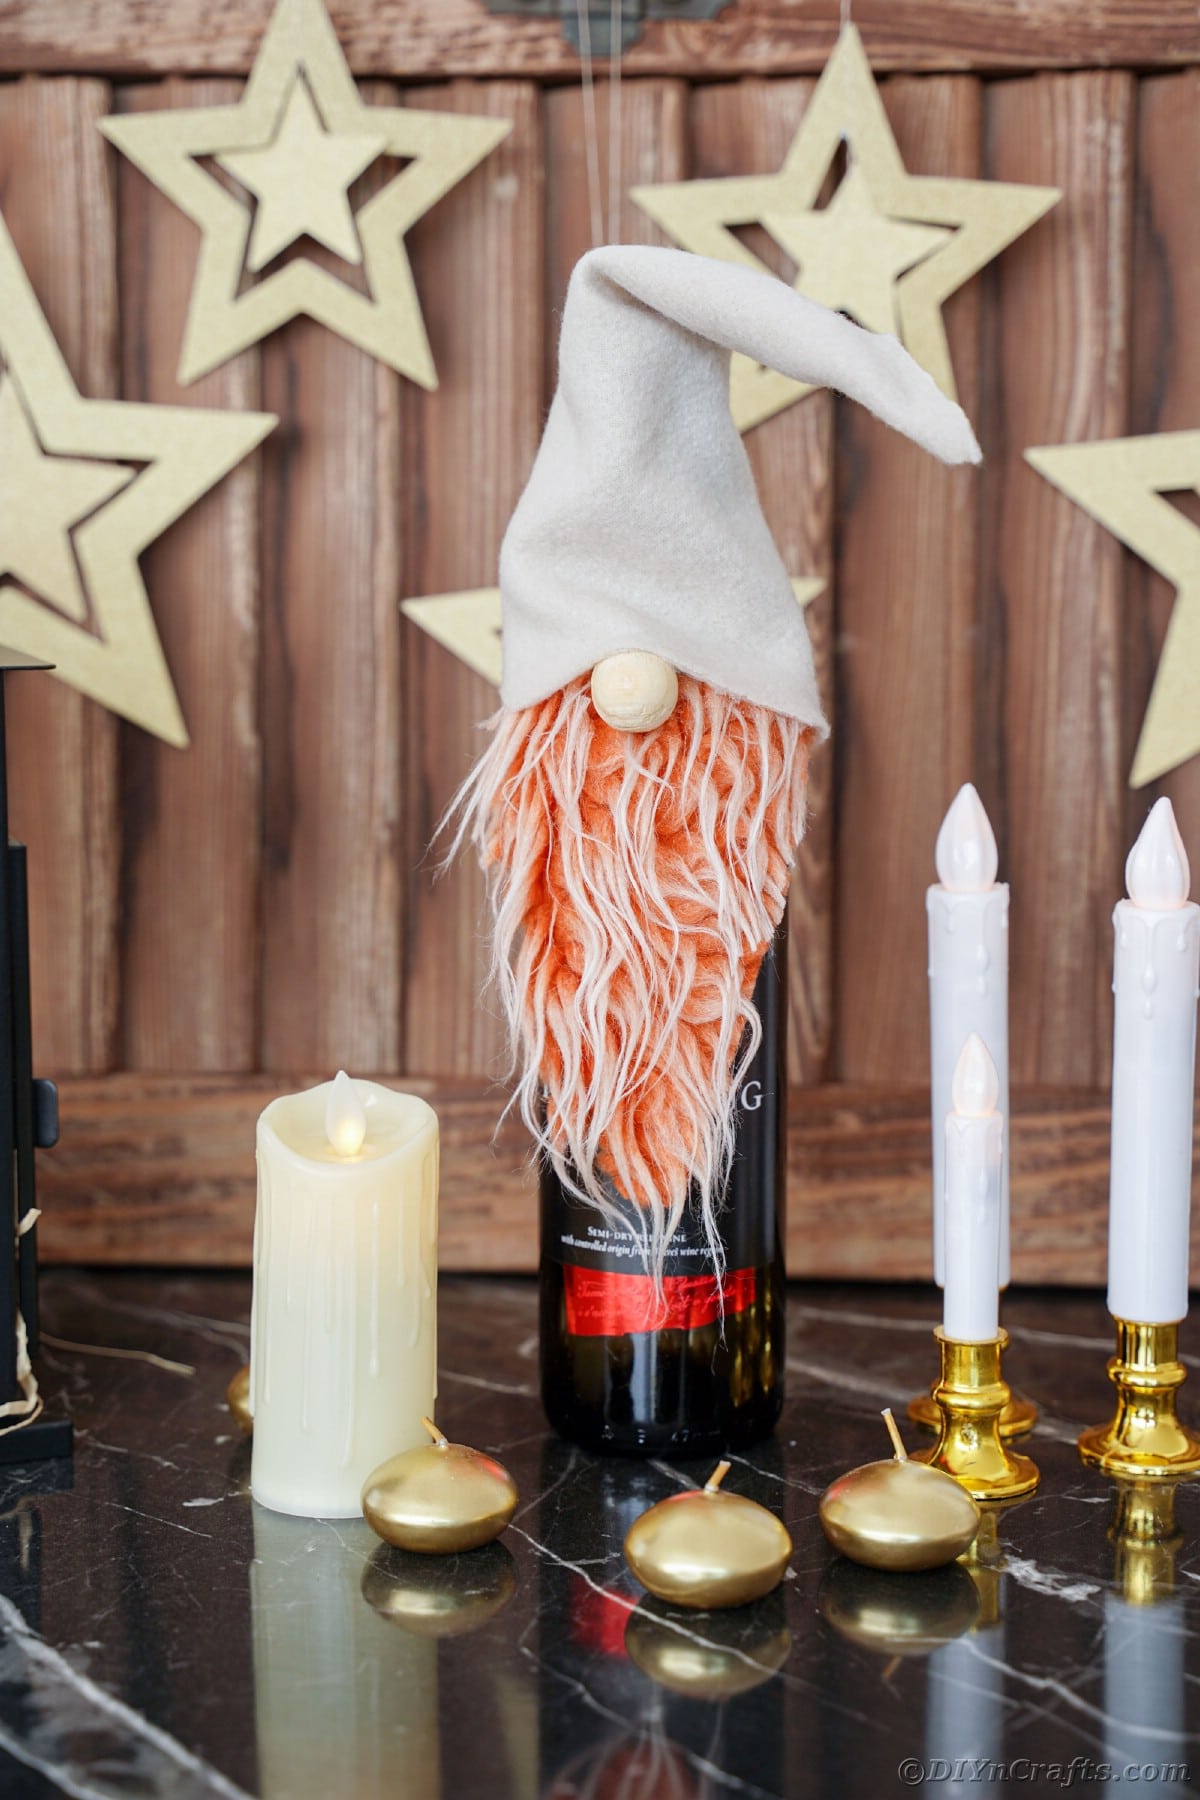 gnome on top of wine bottle on table with candles